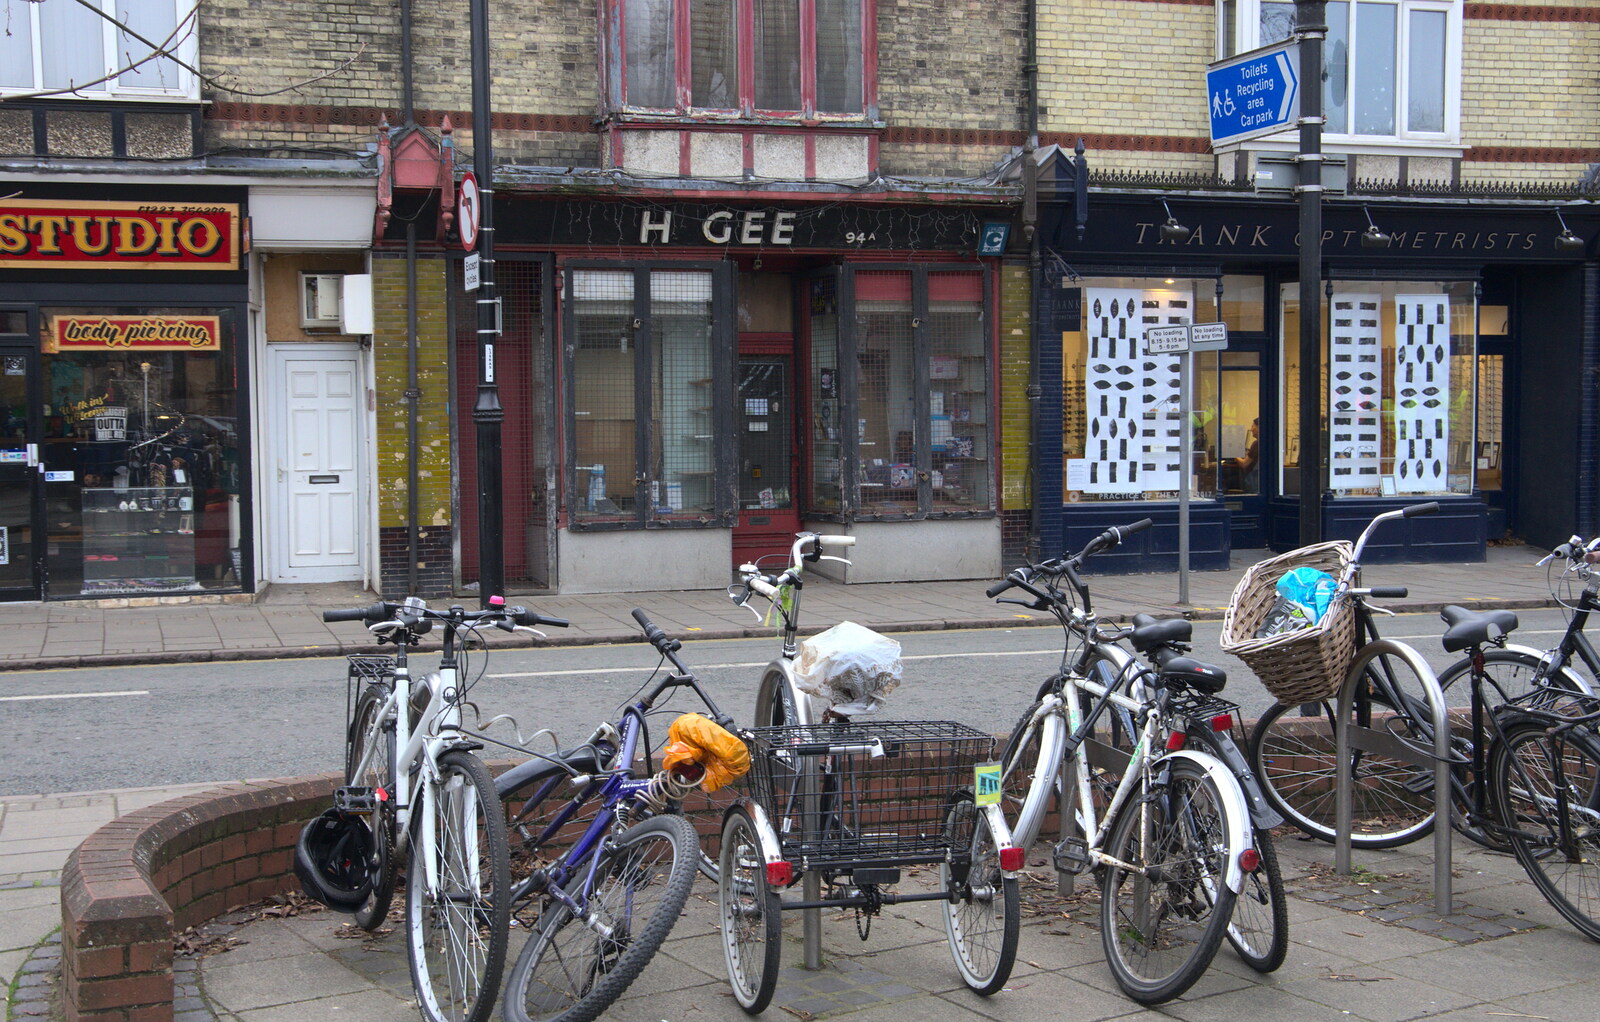 H Gee continues to look (more) derelict as its owner is 'away' from The SwiftKey Reunion Brunch, Regent Street, Cambridge - 12th January 2019